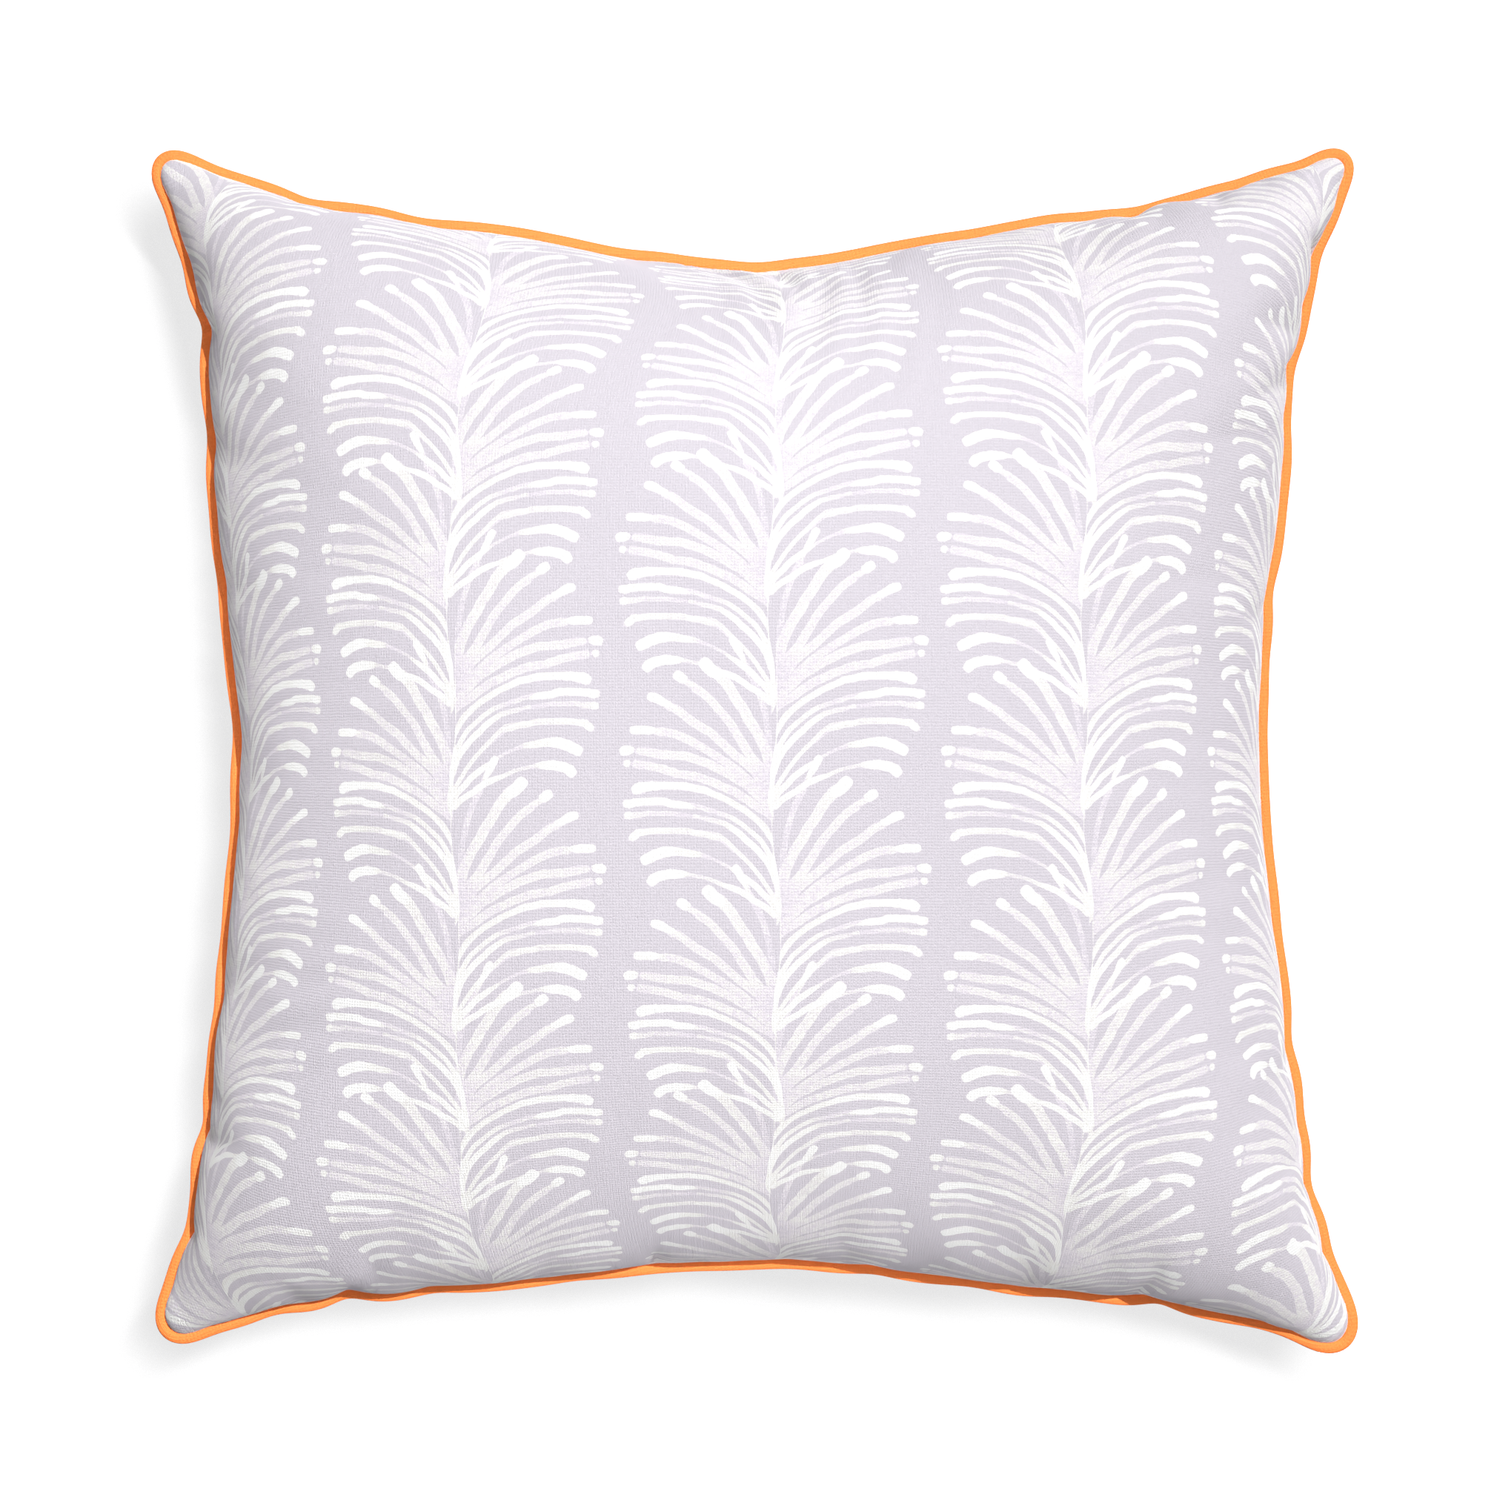 Euro-sham emma lavender custom pillow with clementine piping on white background